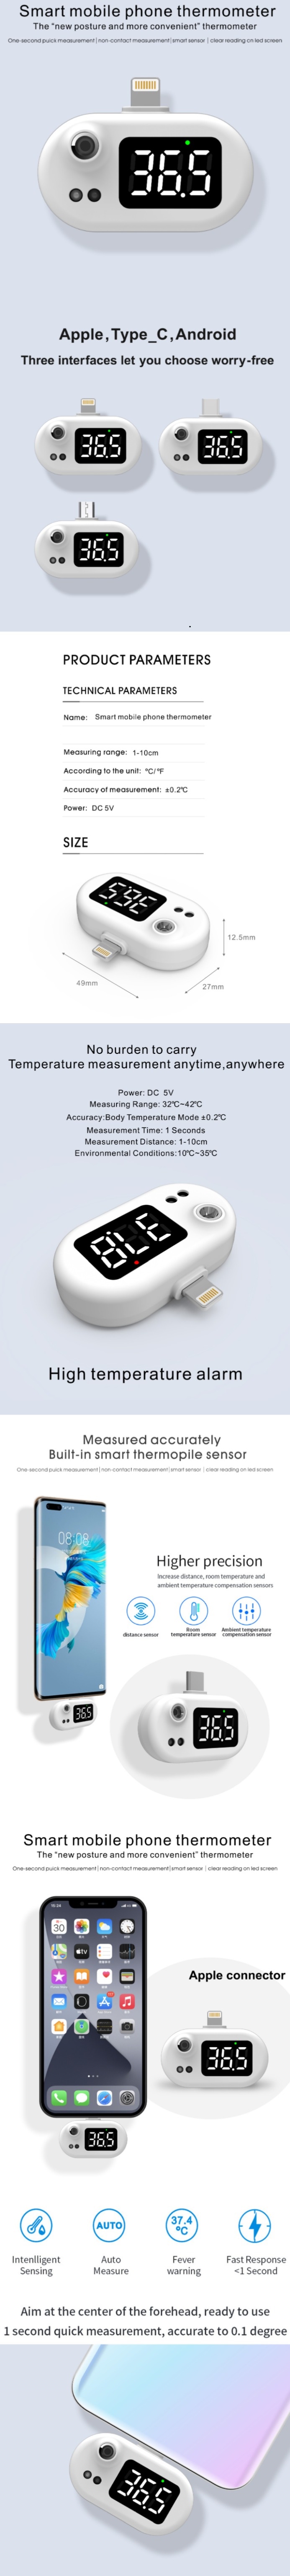 HG05 Mobile Phone Thermometer, iPhone Thermometer, Cellphone Thermometer, Smart Mobile Phone Thermometer, K7 Phone Thermometer, RYOBI Phone Thermometer, PCsensor Mobile Phone Thermometer, Thermodo Phone Thermometer, Oblumi Tapp, Odoyo iThermie, iWeeCare Temp Pal,